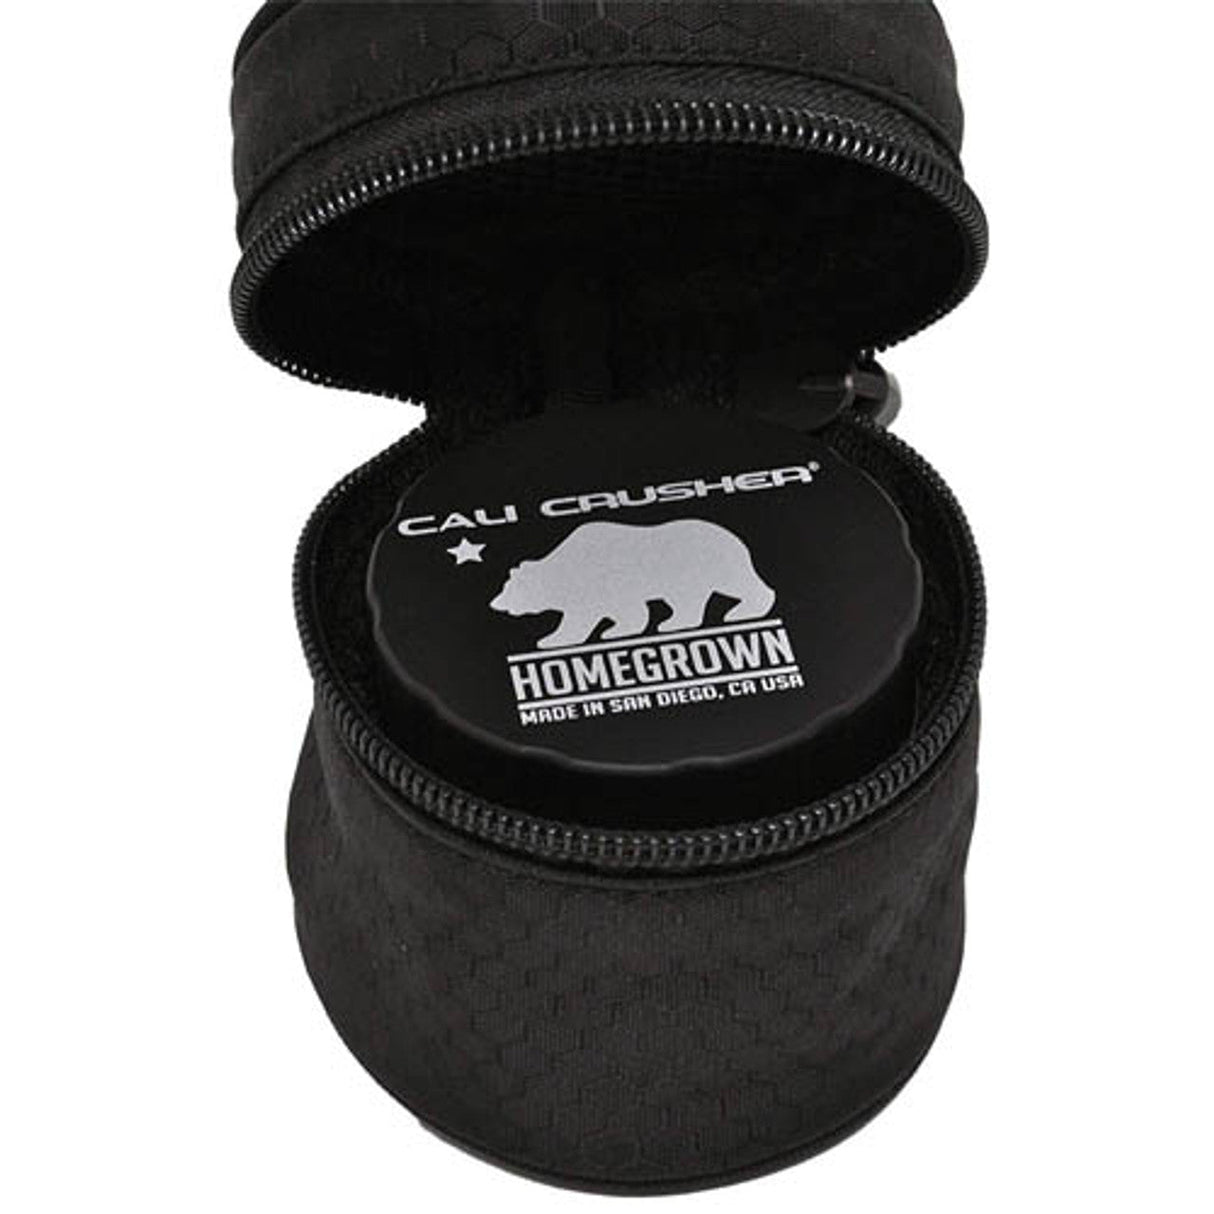 Cali Crusher Homegrown Grinder Case open view showing locking zipper and logo